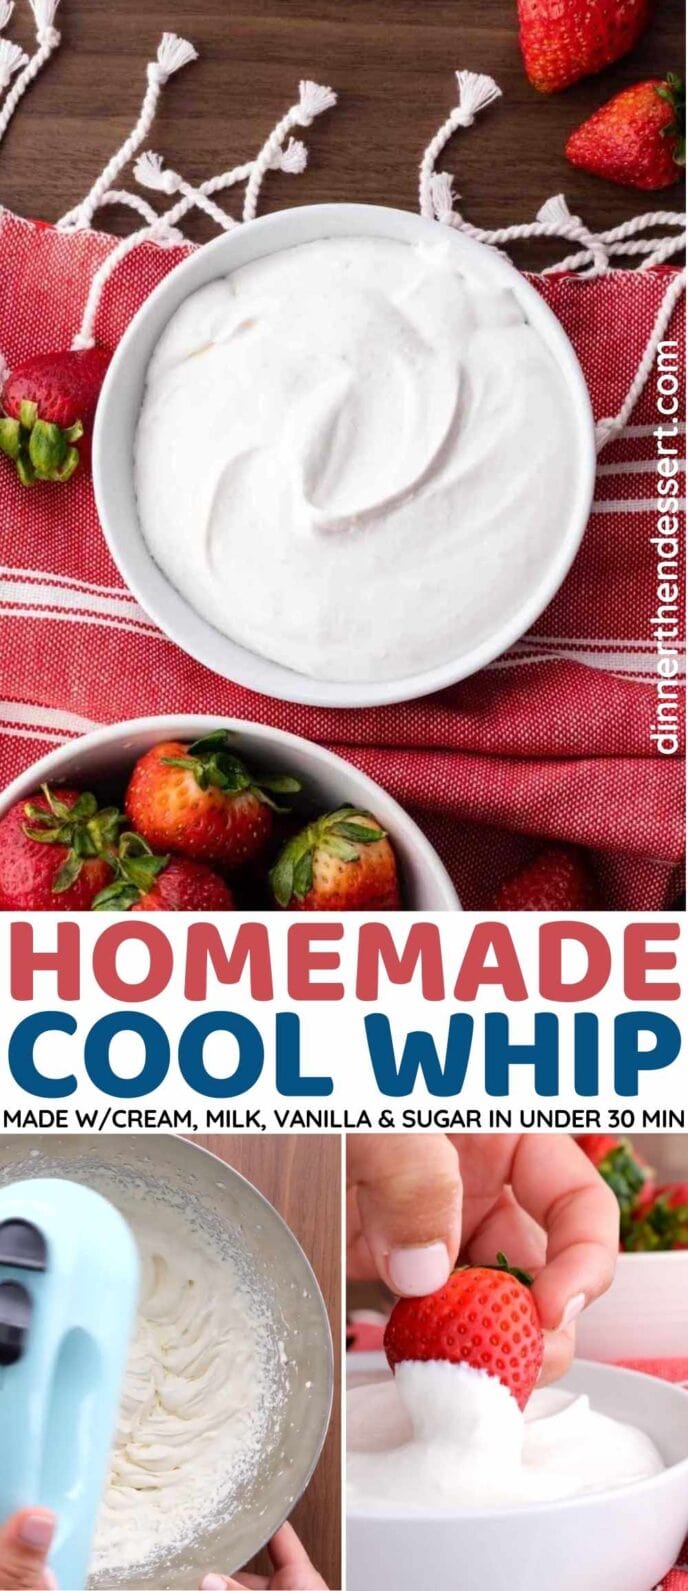 Homemade Cool Whip collage